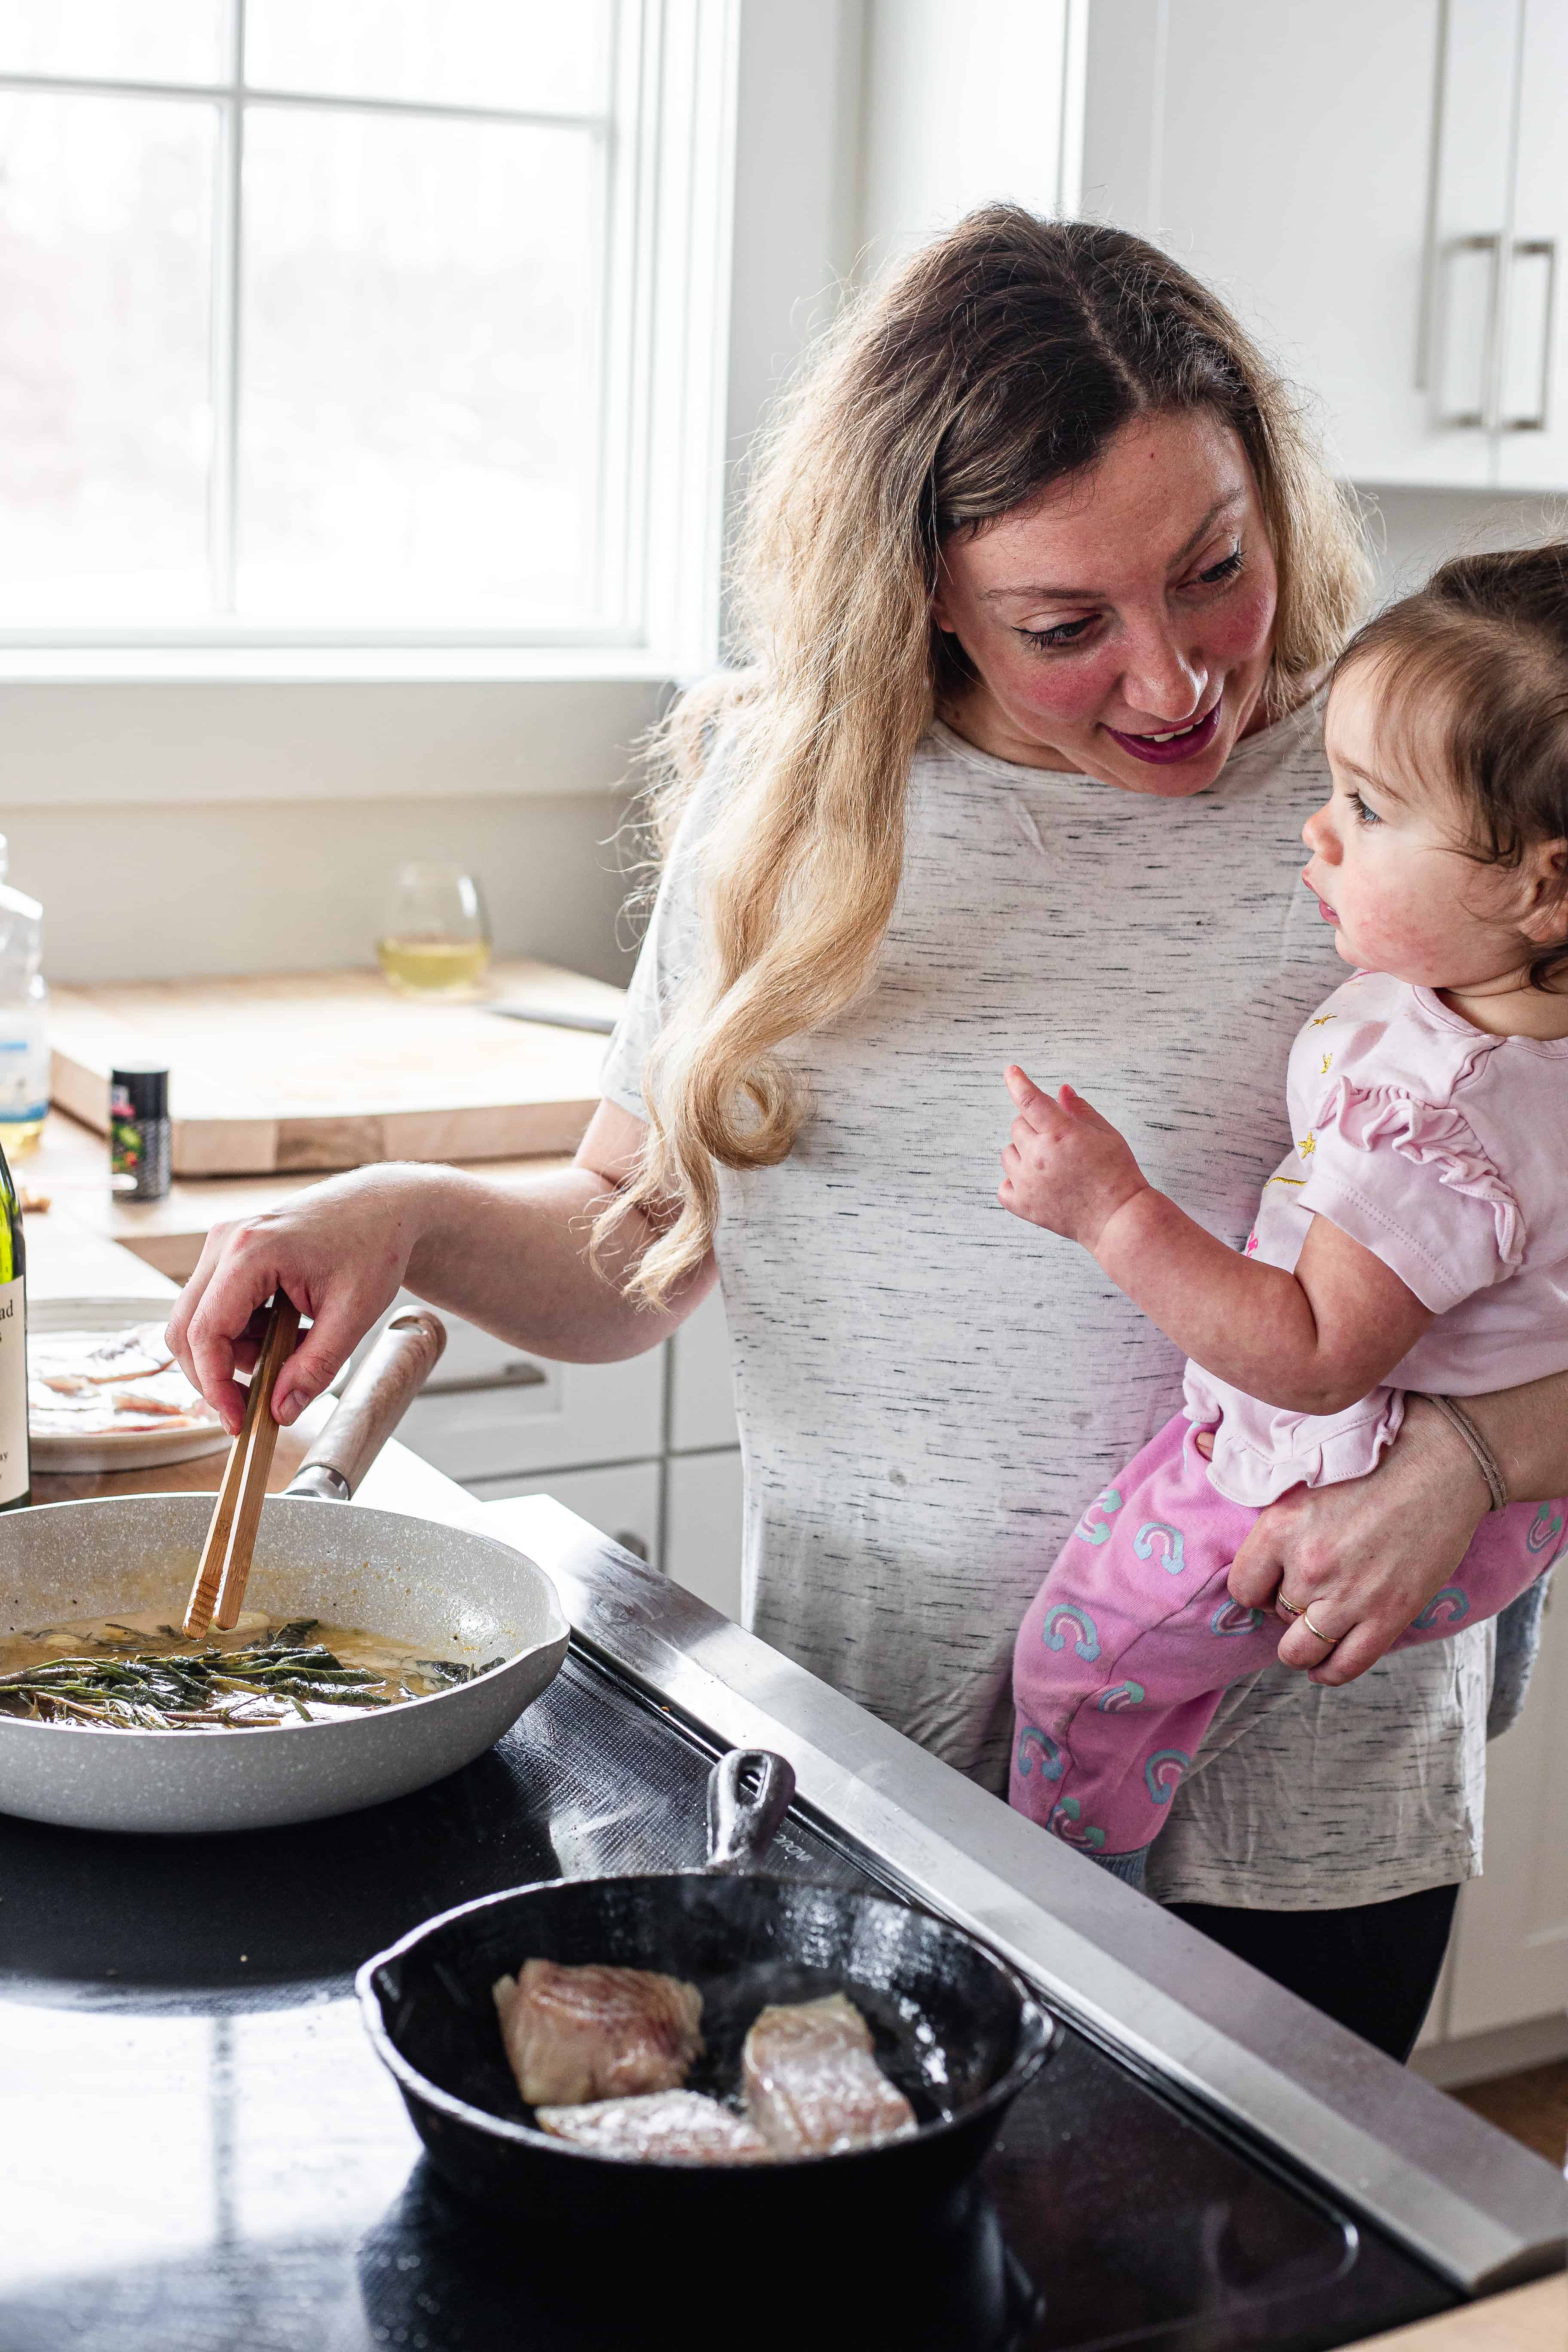 The cook cooking the white wine sauce while holding her baby.